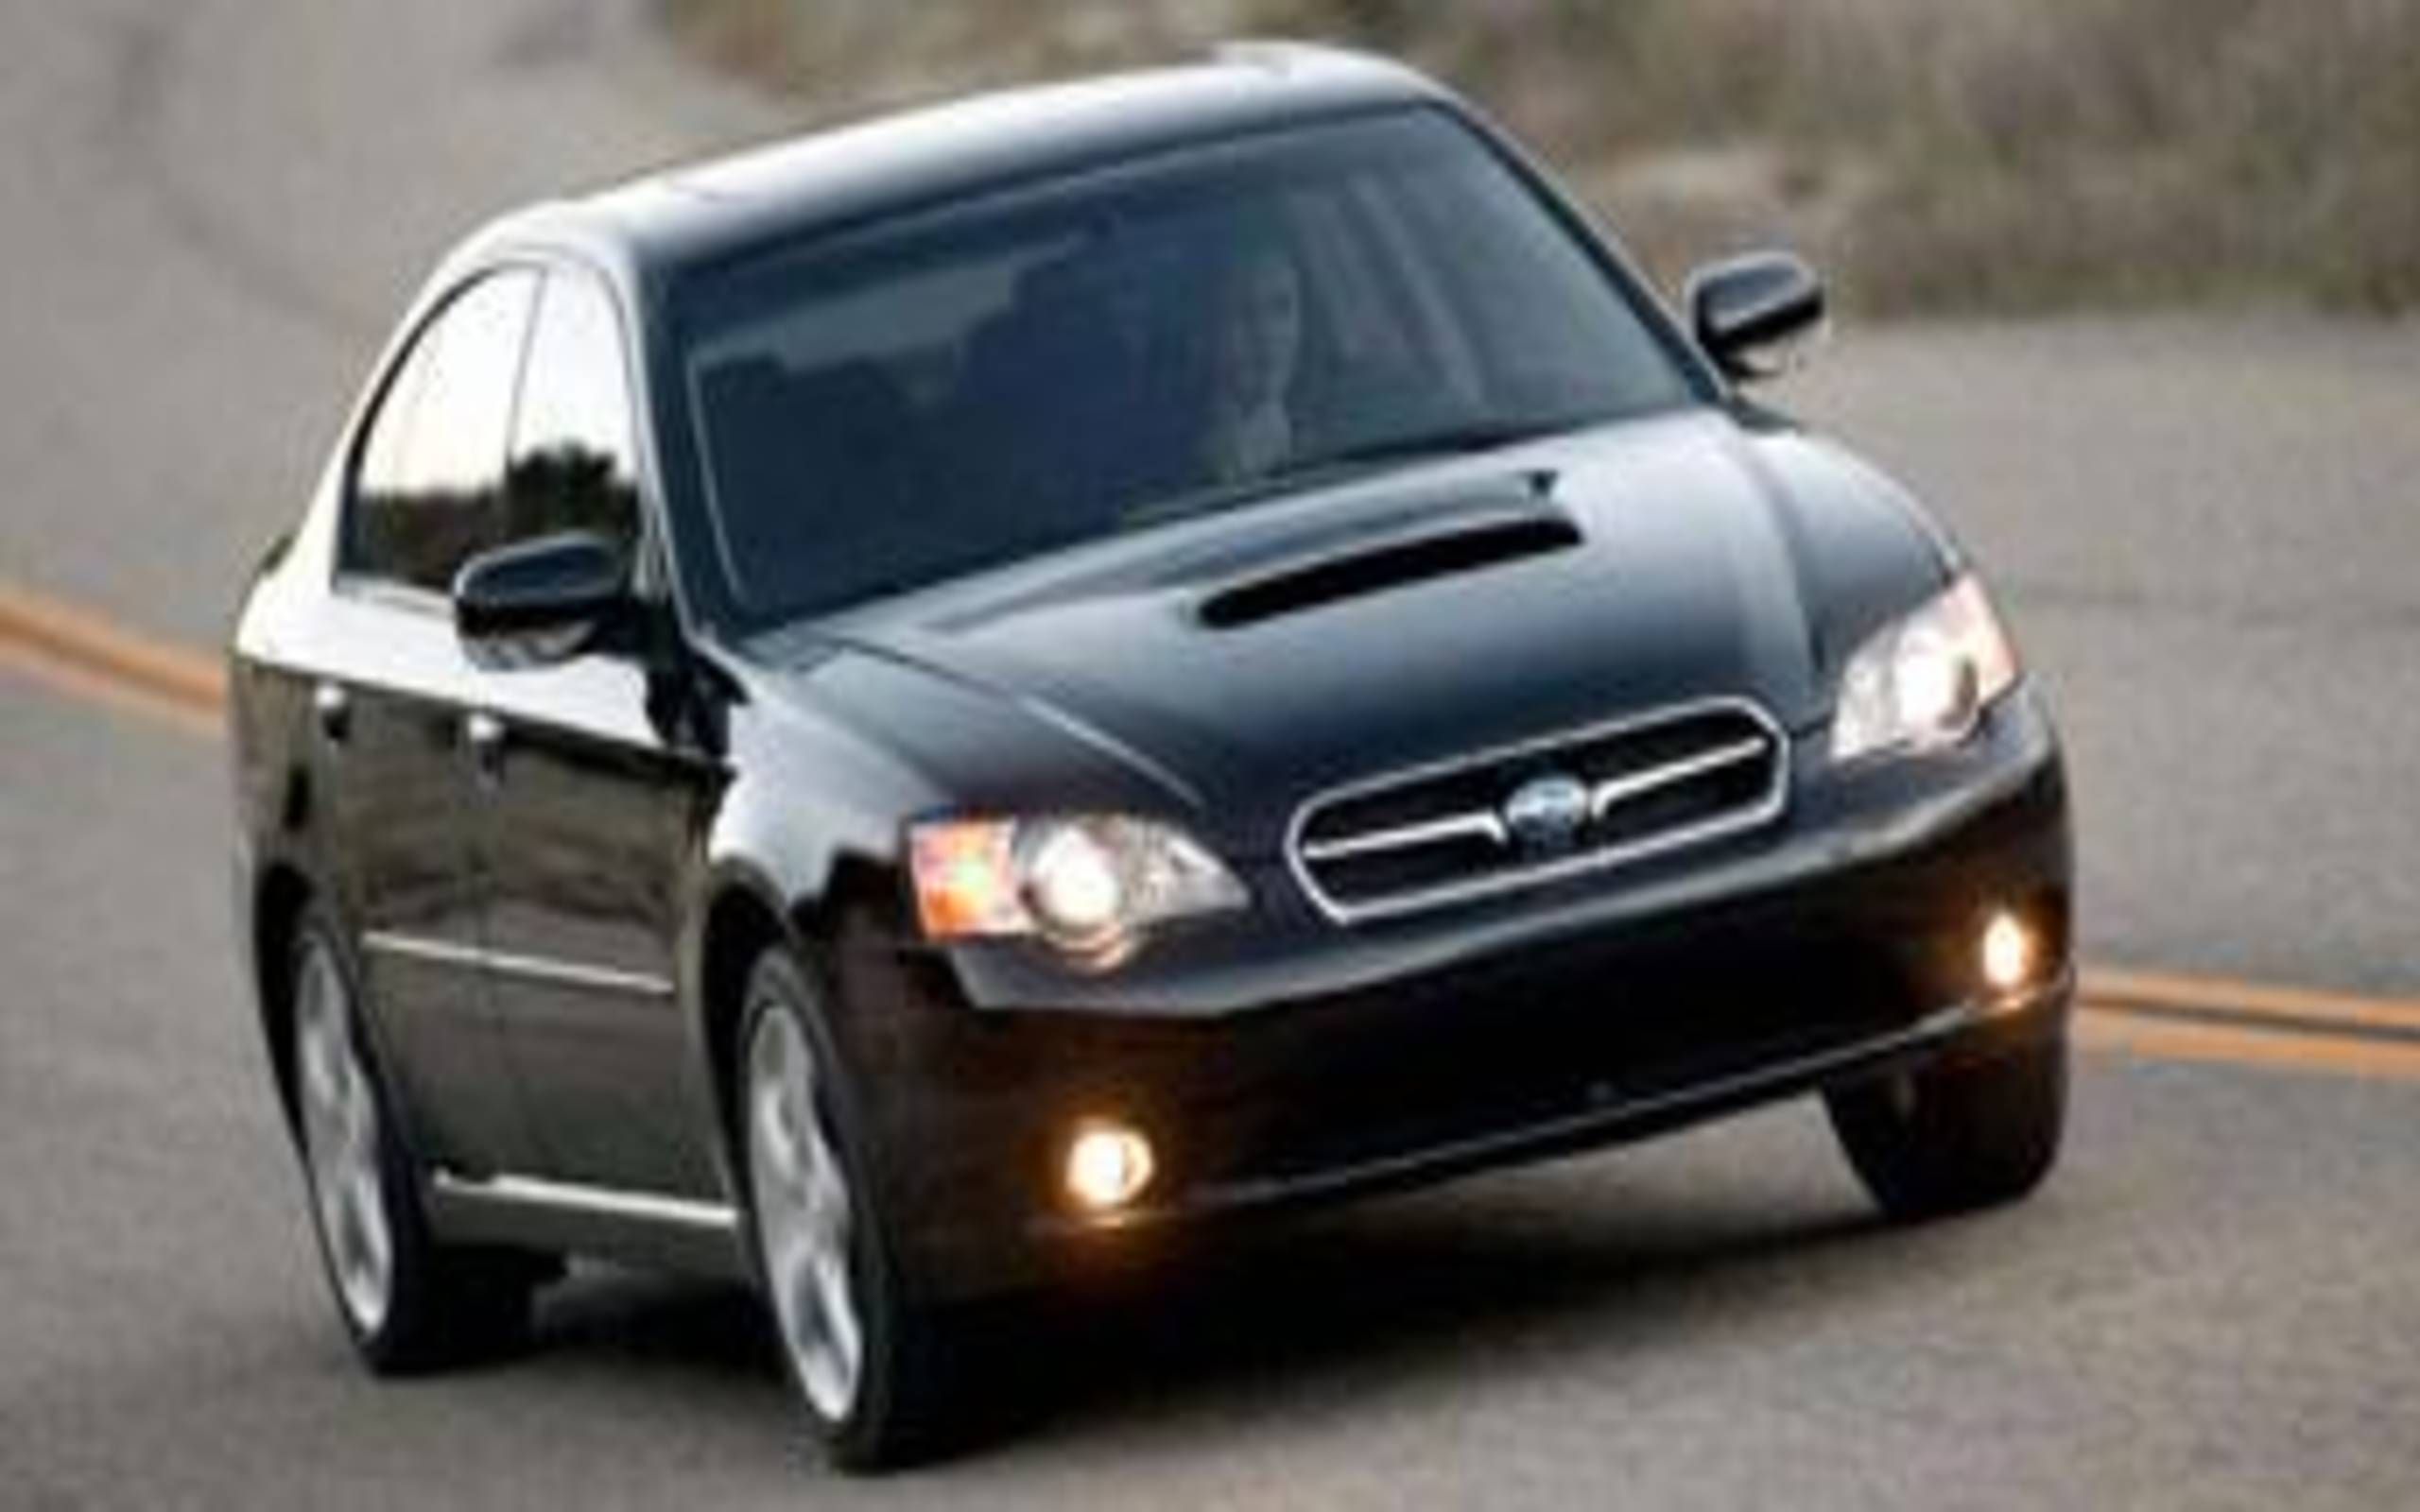 2005 Subaru Legacy 2 5 Gt Limited Wake Up To This Sleeper